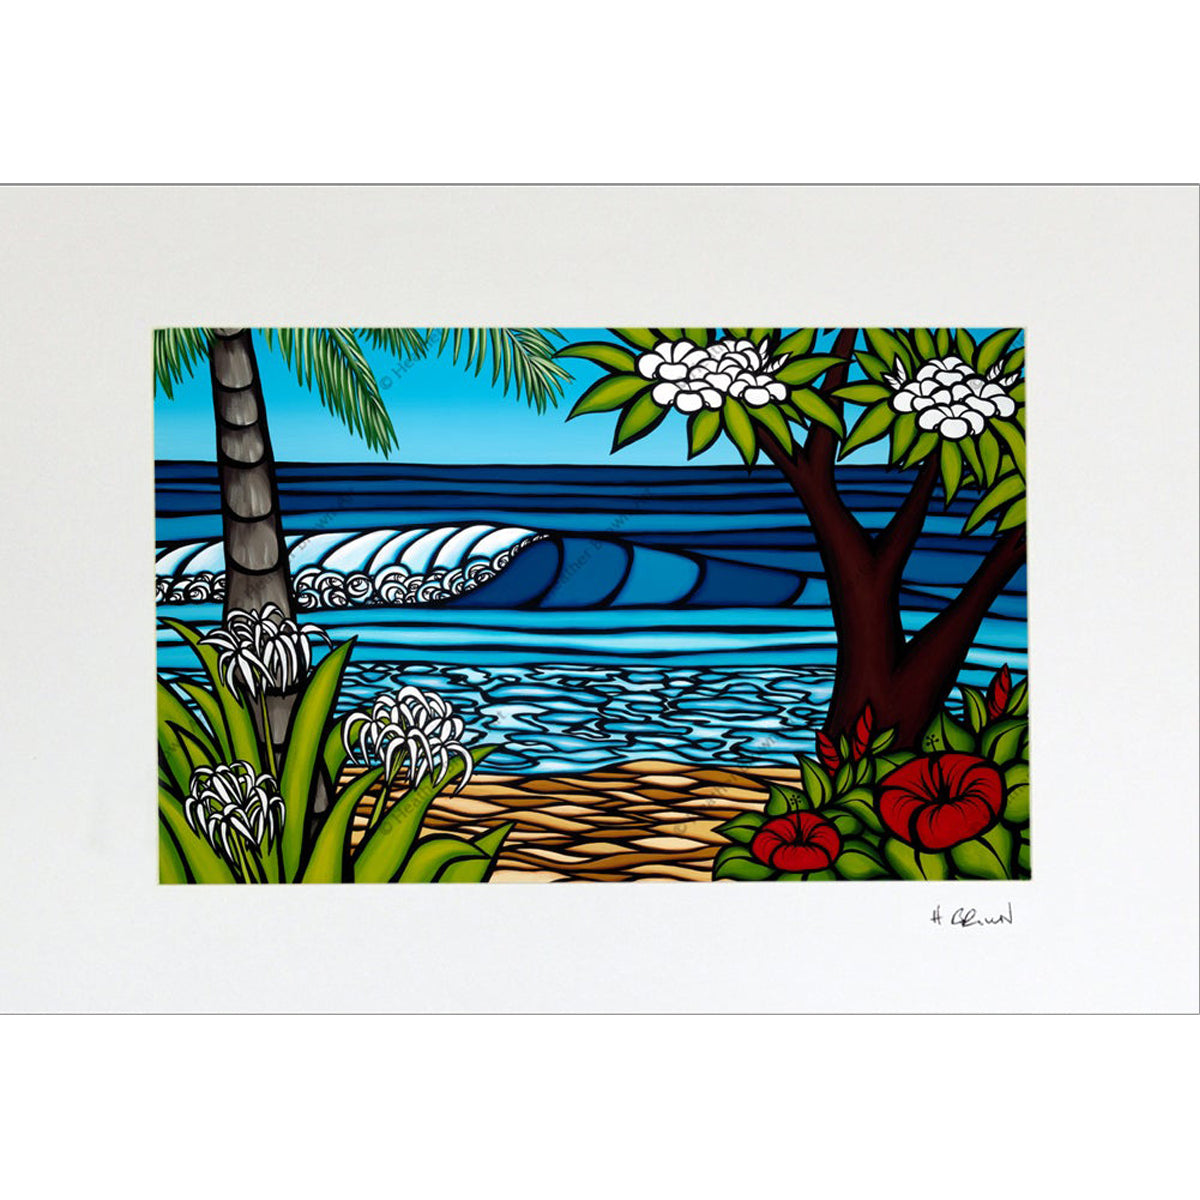 Pipe Dreams - Matted Print on Paper (Mat Only) by Hawaii surf artist Heather Brown